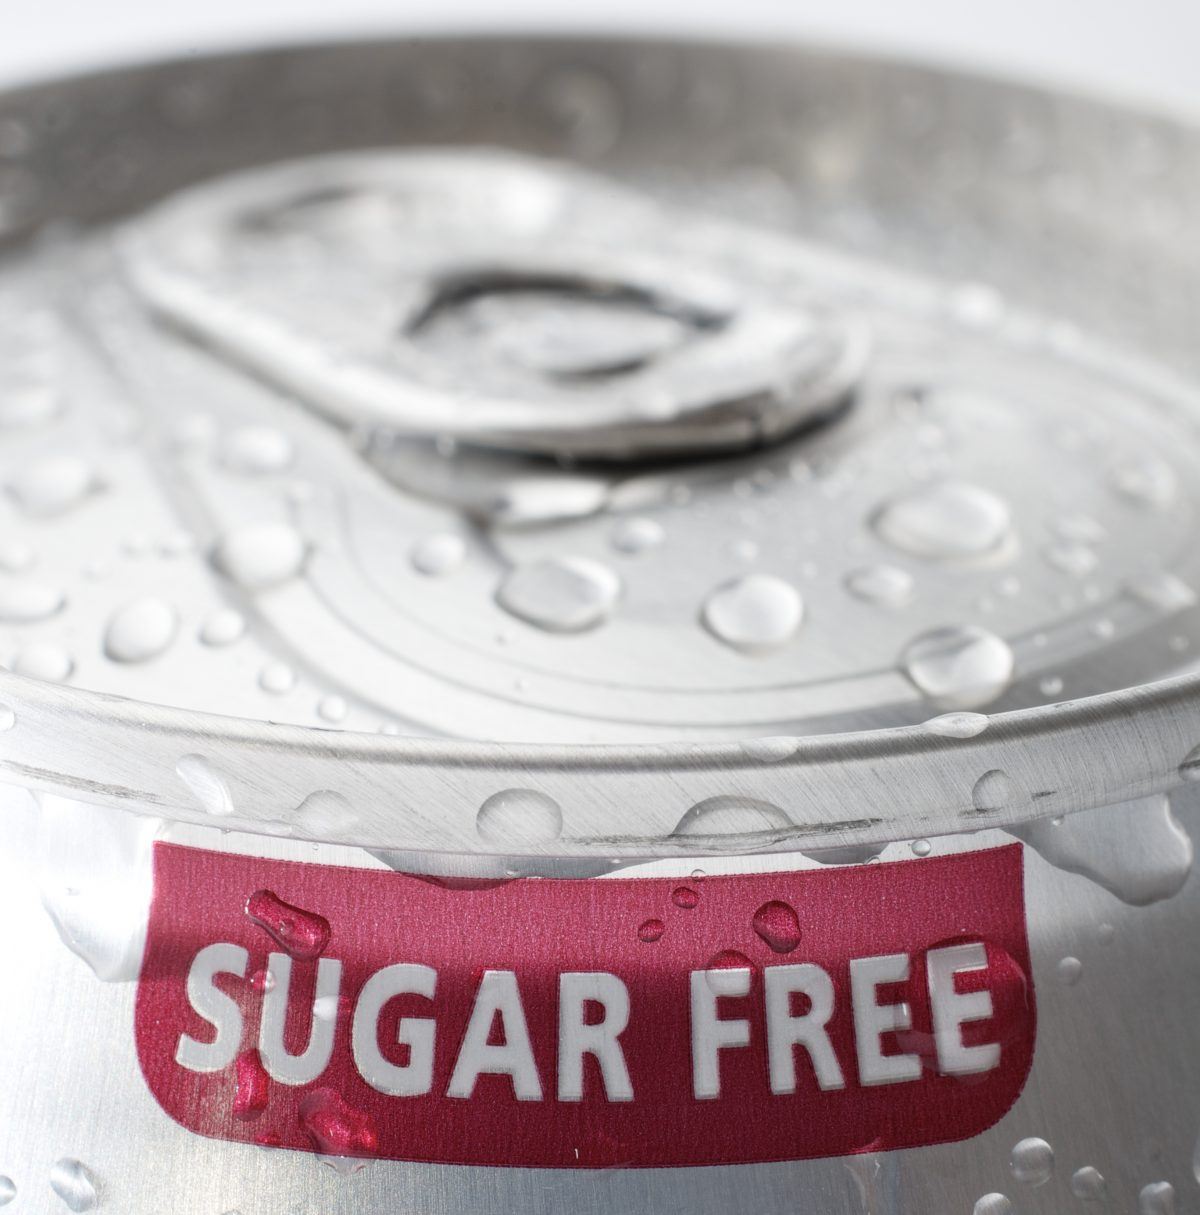 sugar free label on a can of soda